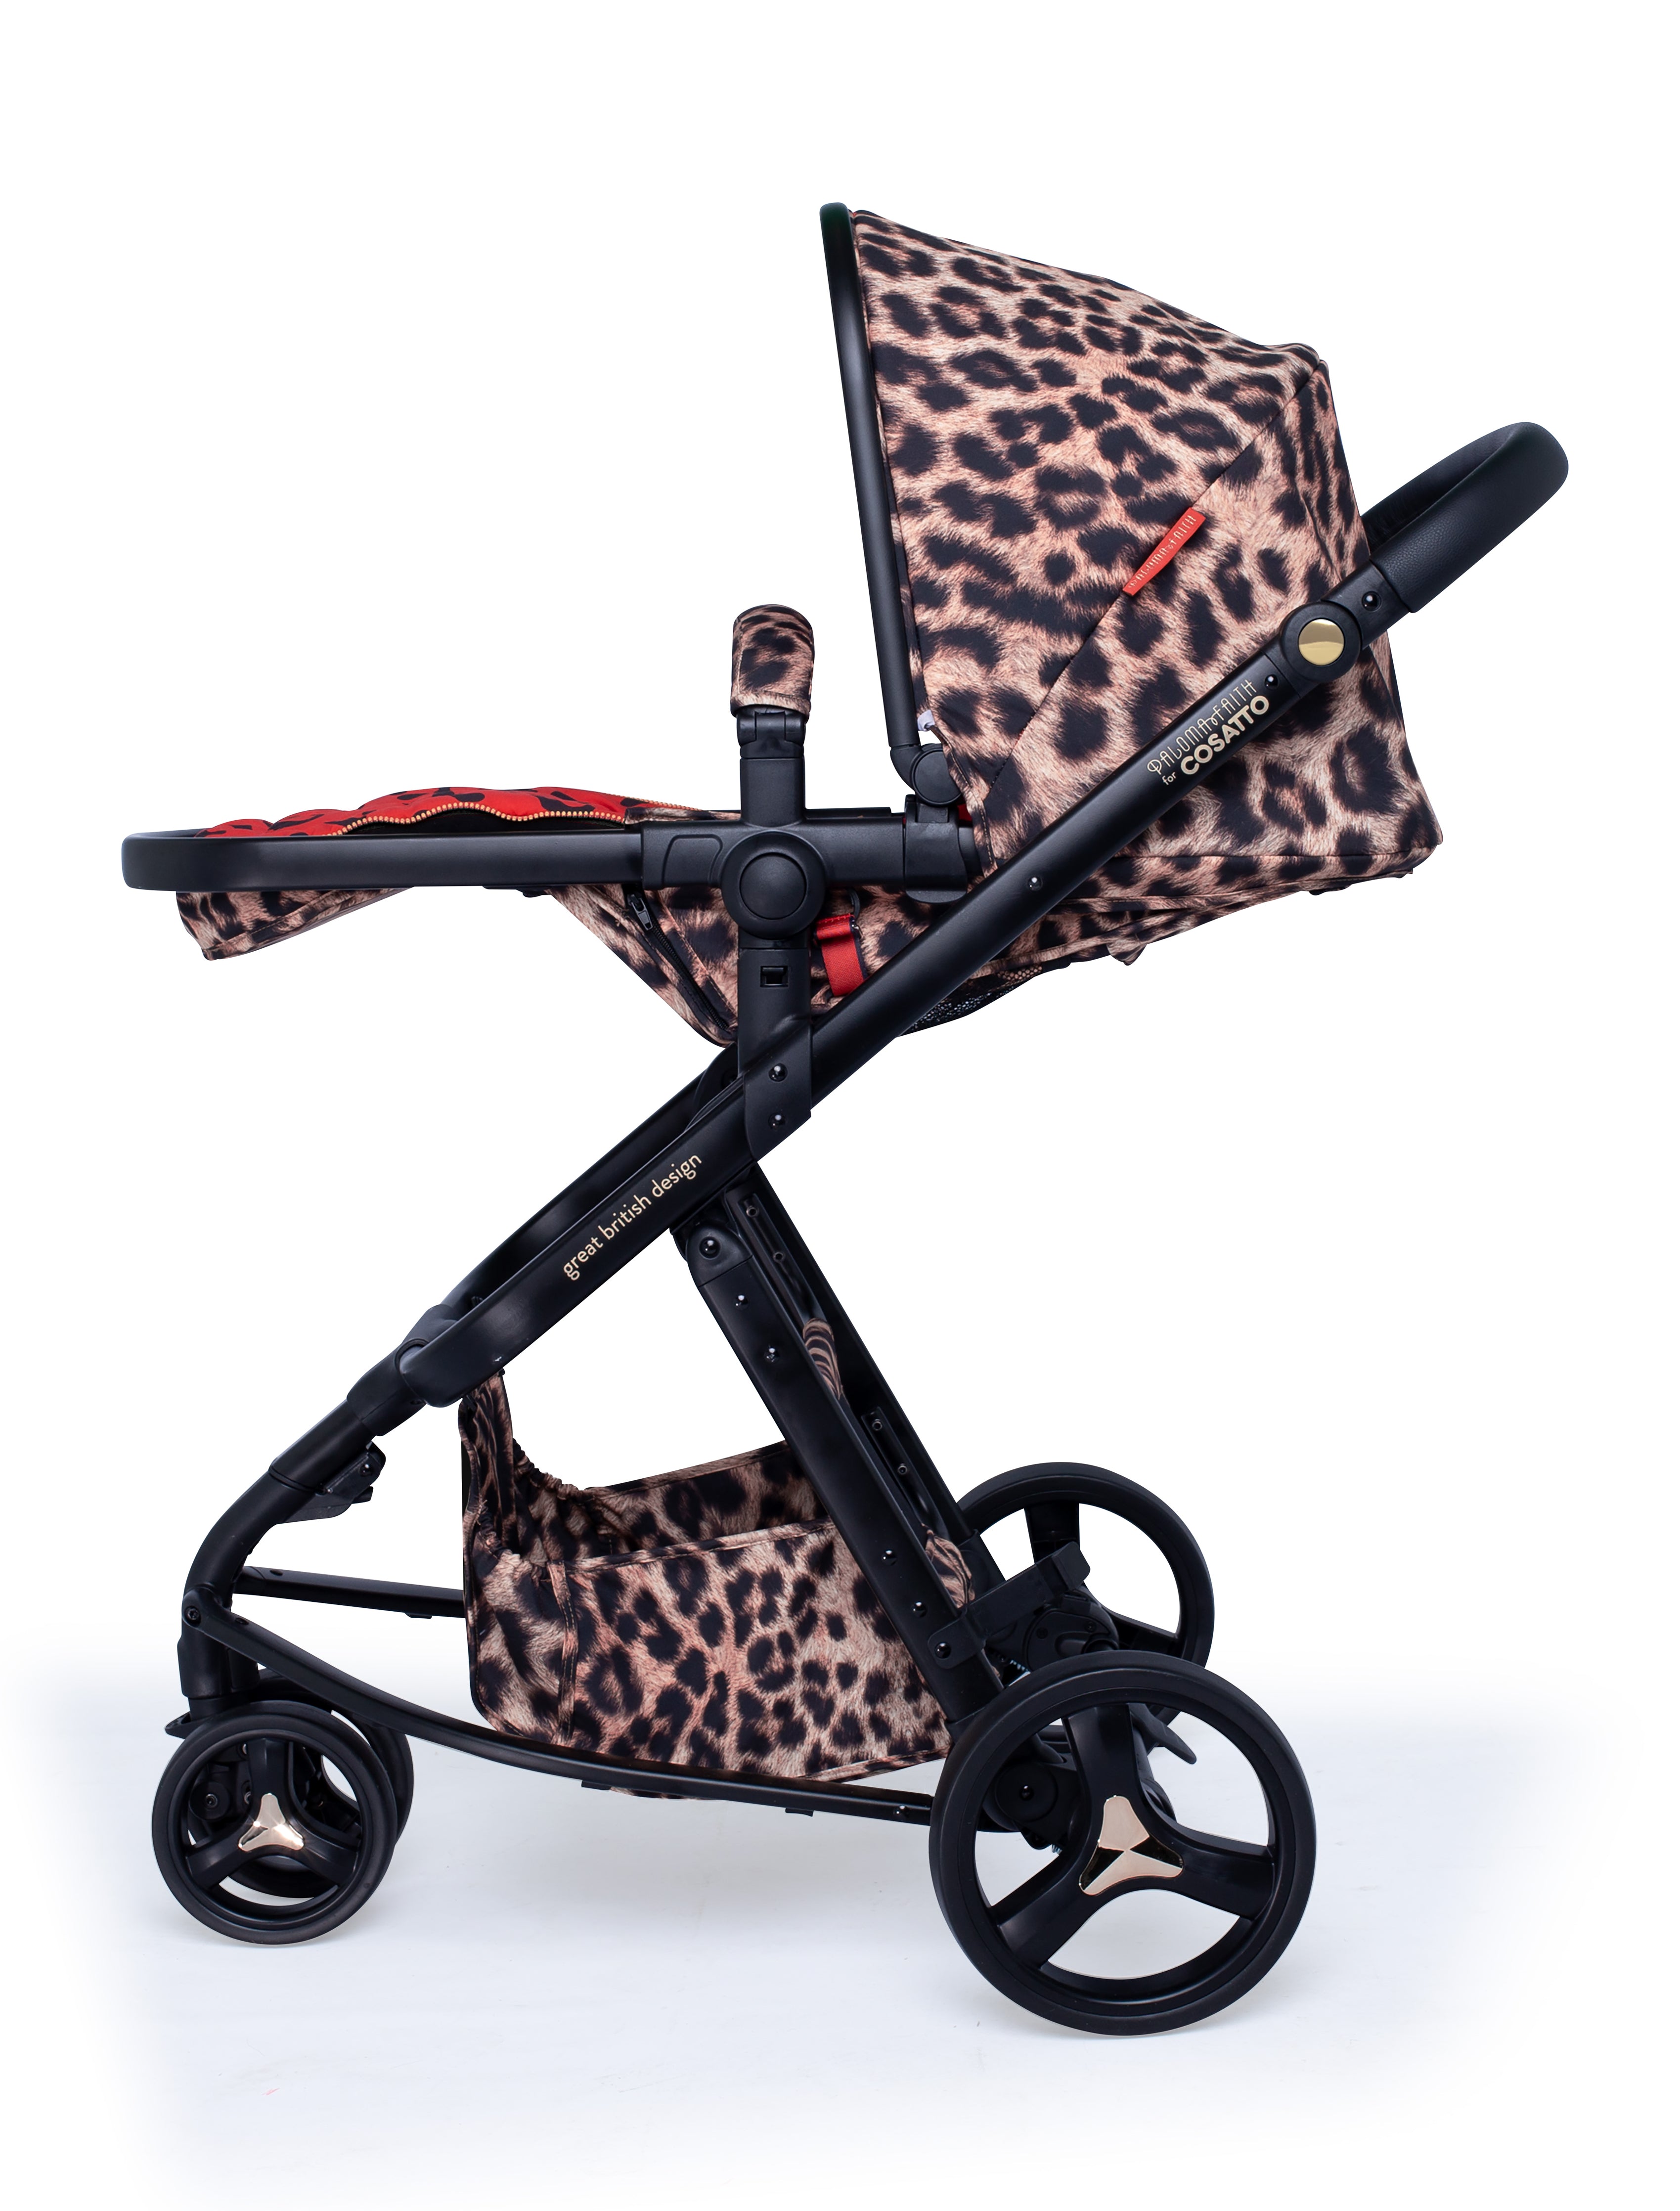 Giggle 3 Pram and Pushchair Special Edition Hear us Roar